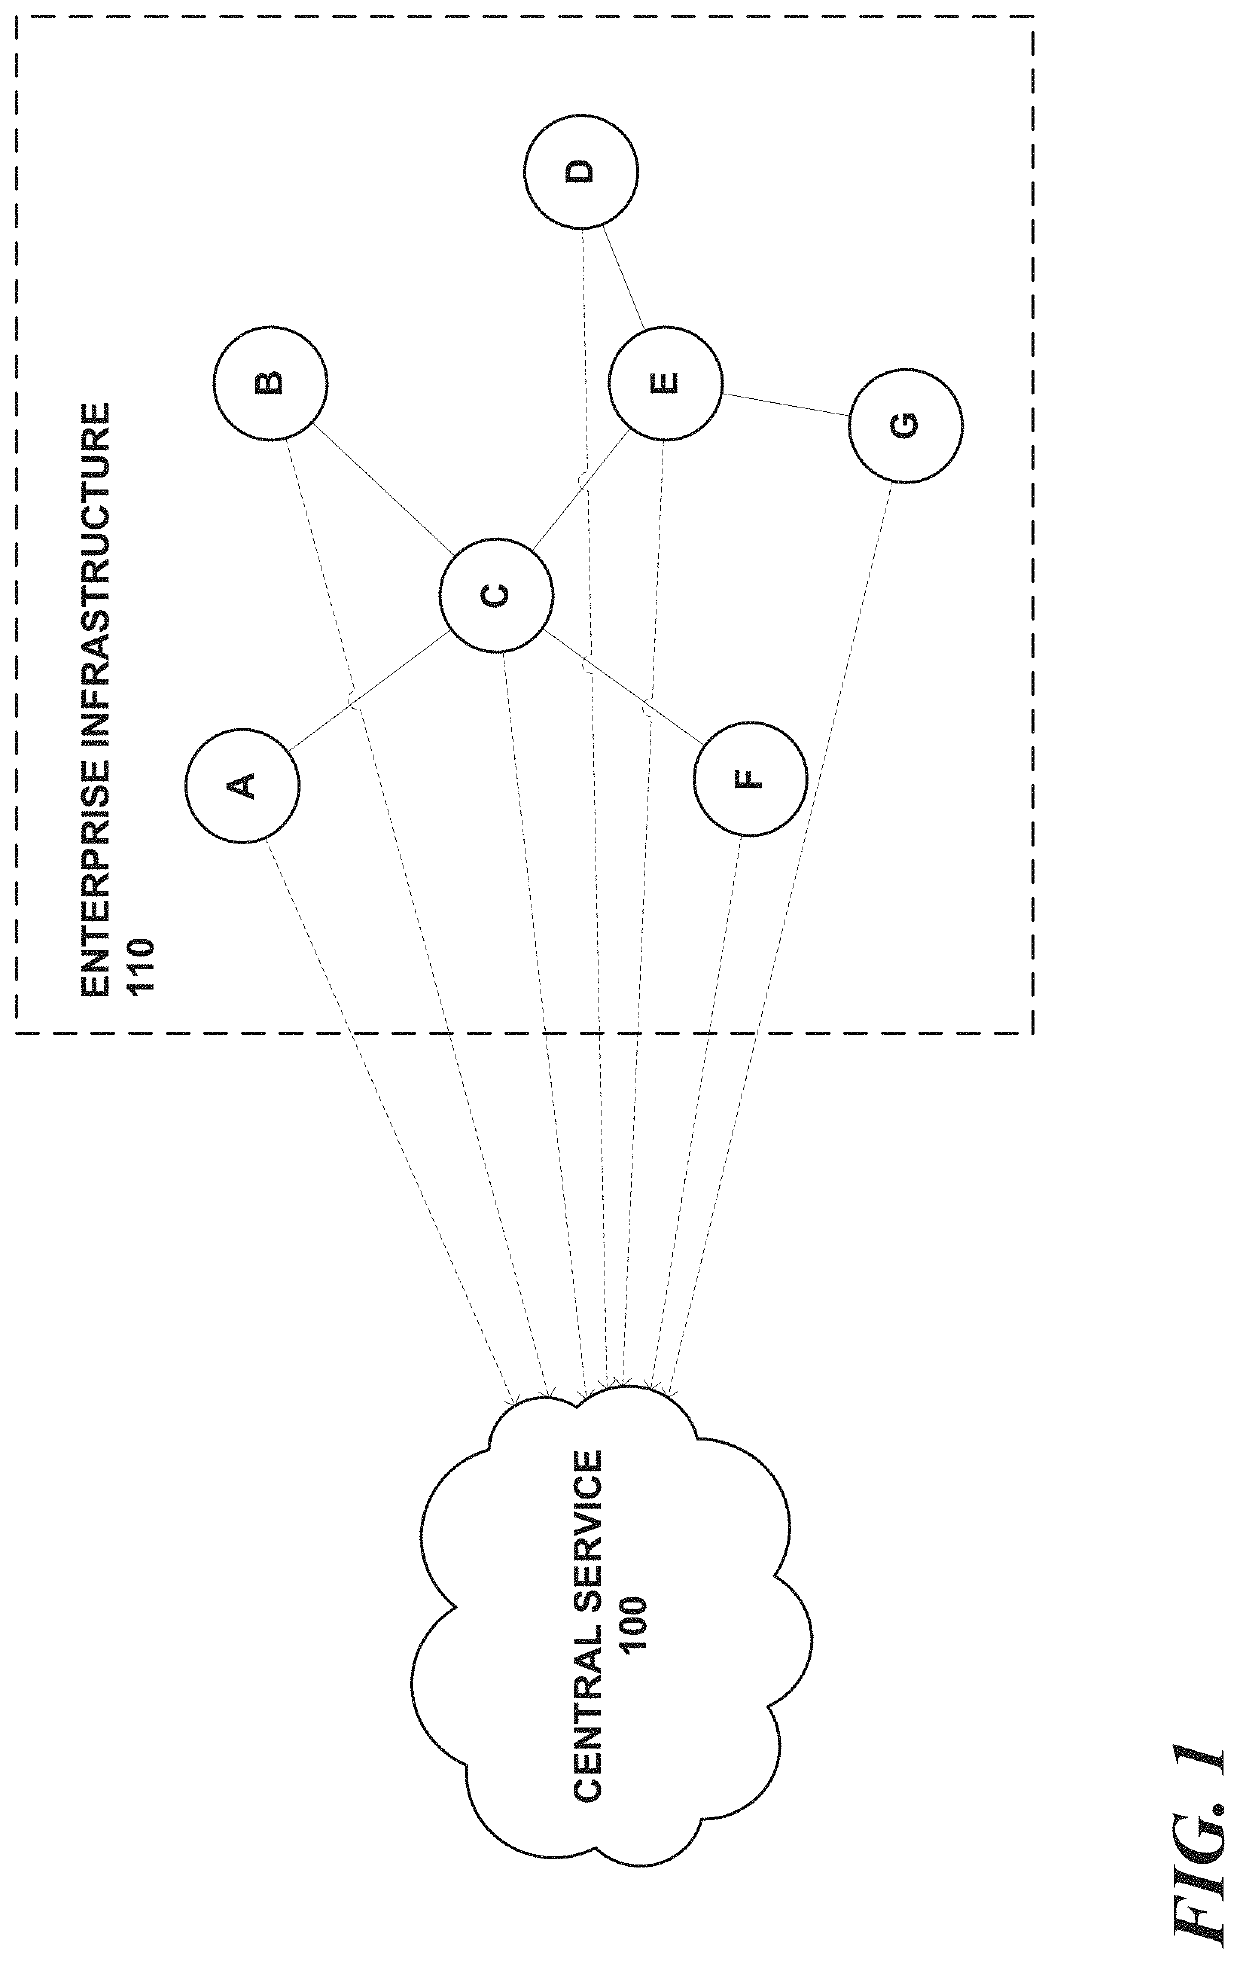 Methods and system for identifying relationships among infrastructure security-related events